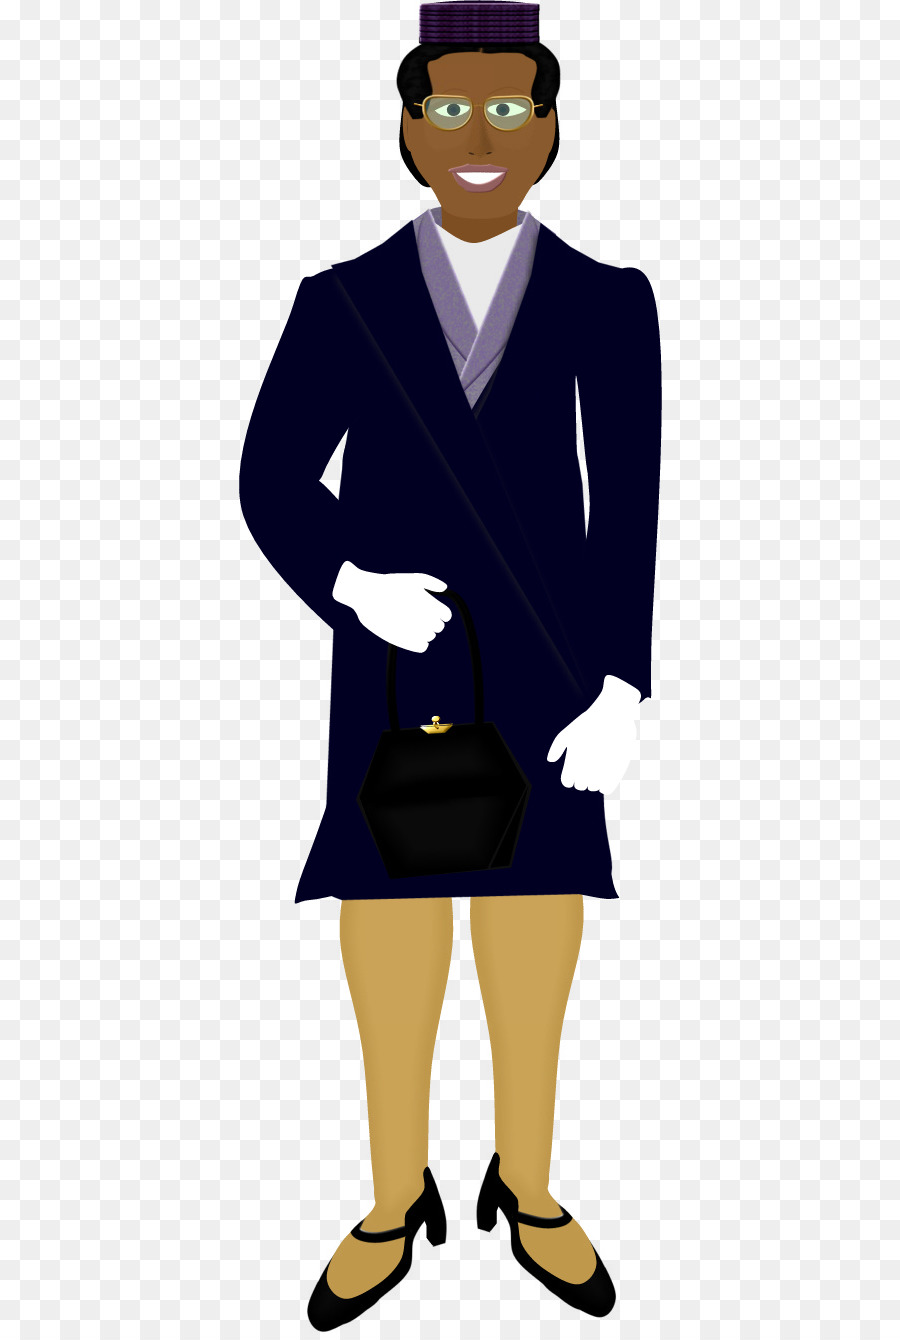 Montgomery bus boycott Rosa Parks Drawing United States - united states png download - 424*1333 - Free Transparent Montgomery Bus Boycott png Download.